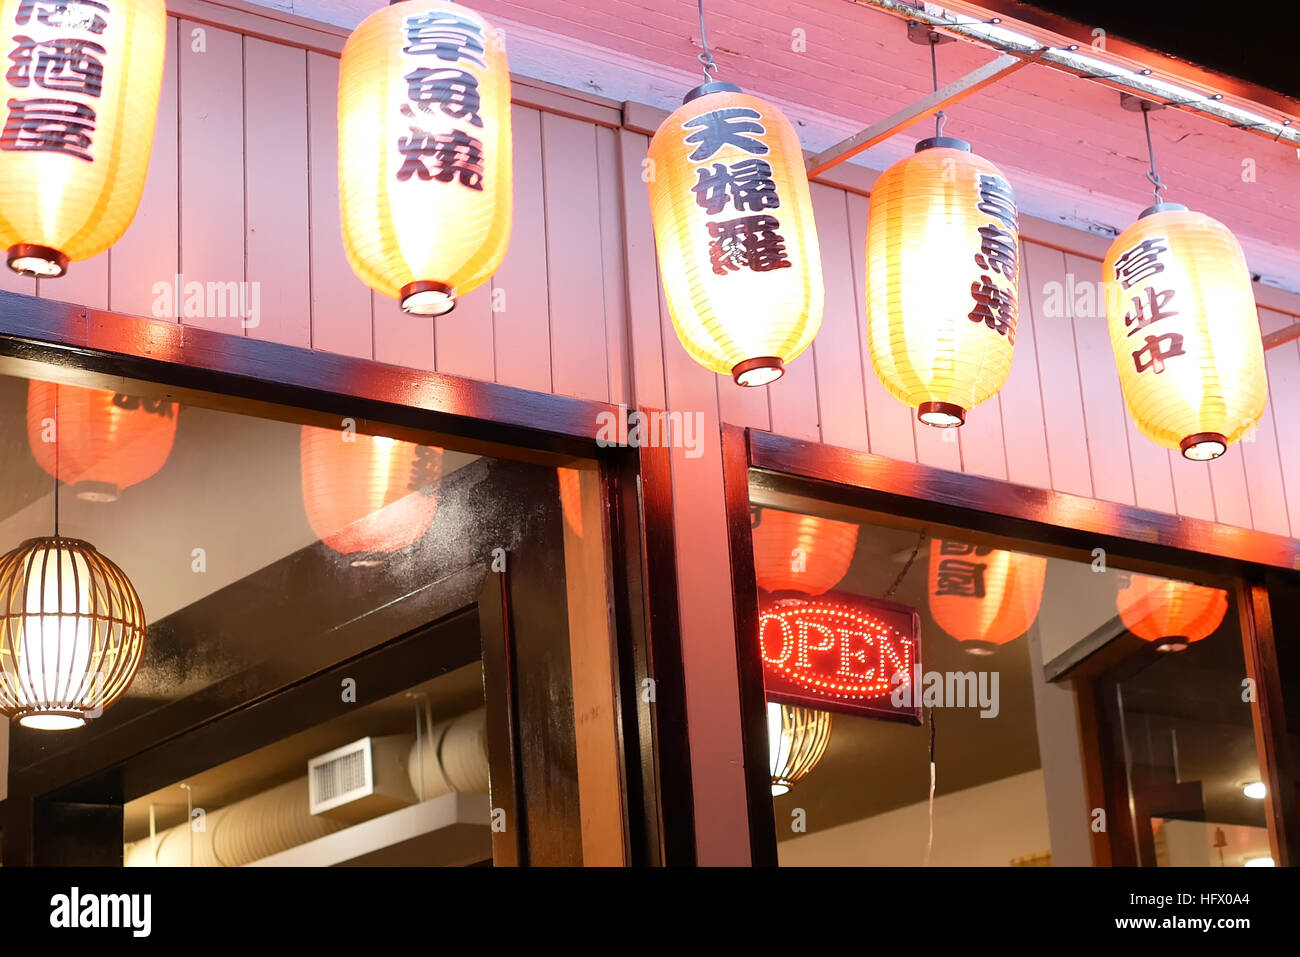 New Westminster, BC, Canada - December 06, 2016 : Line of the red ball paper lanterns in front of Japanese restaurant Stock Photo